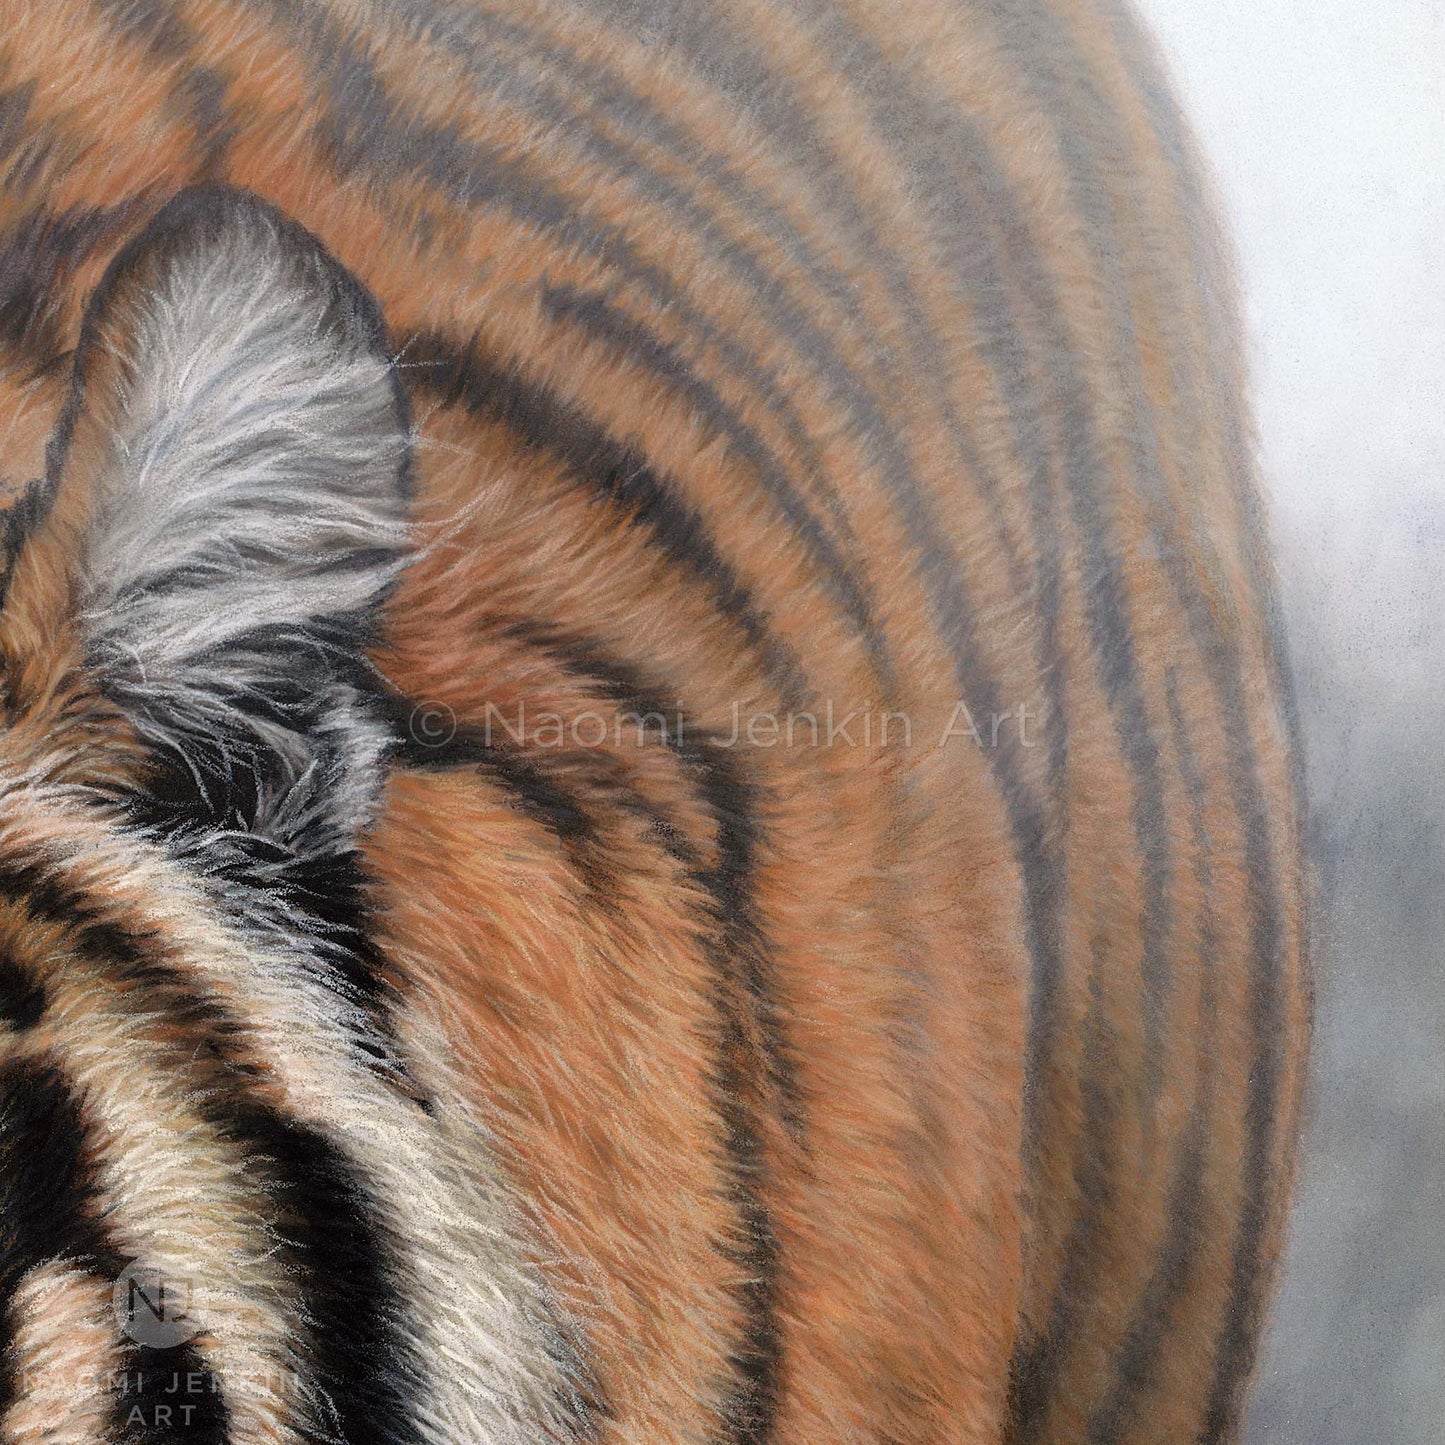 Close up detail from tiger painting "Stealth" by wildlife artist Naomi Jenkin Art